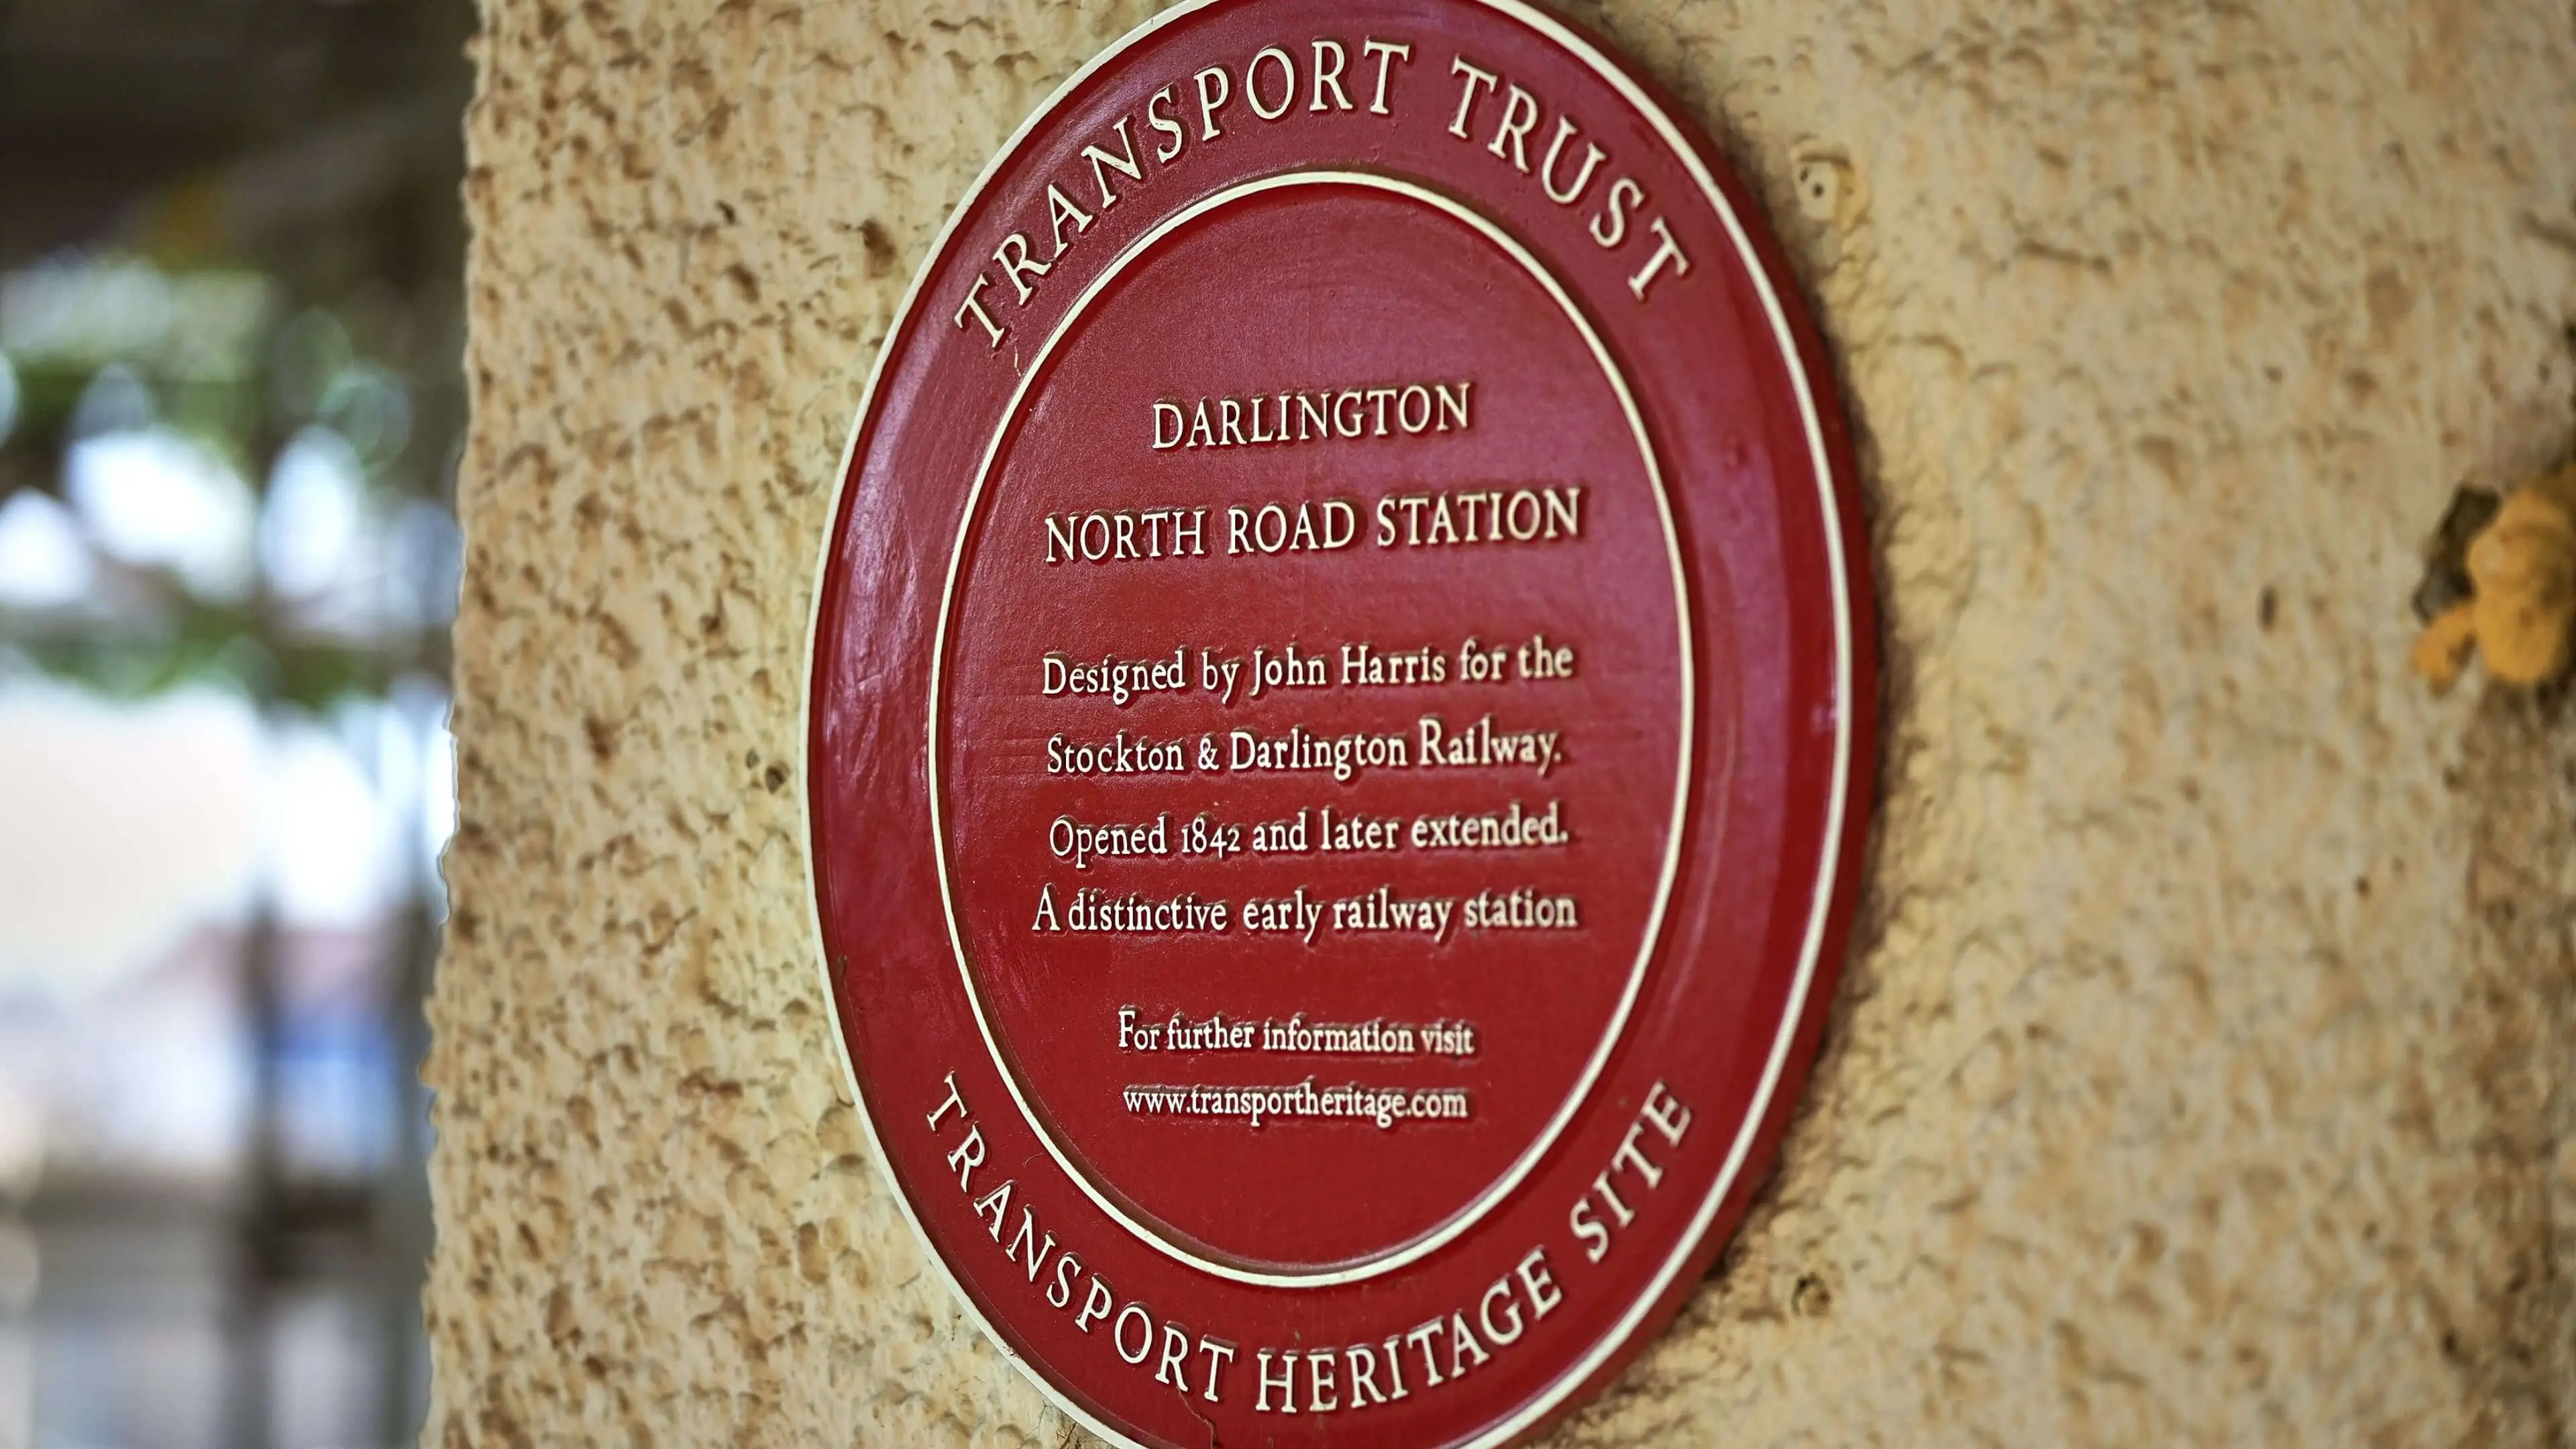 A round, red wall plaque commemorating the Stockton & Darlington Railway and North Road Station Museum